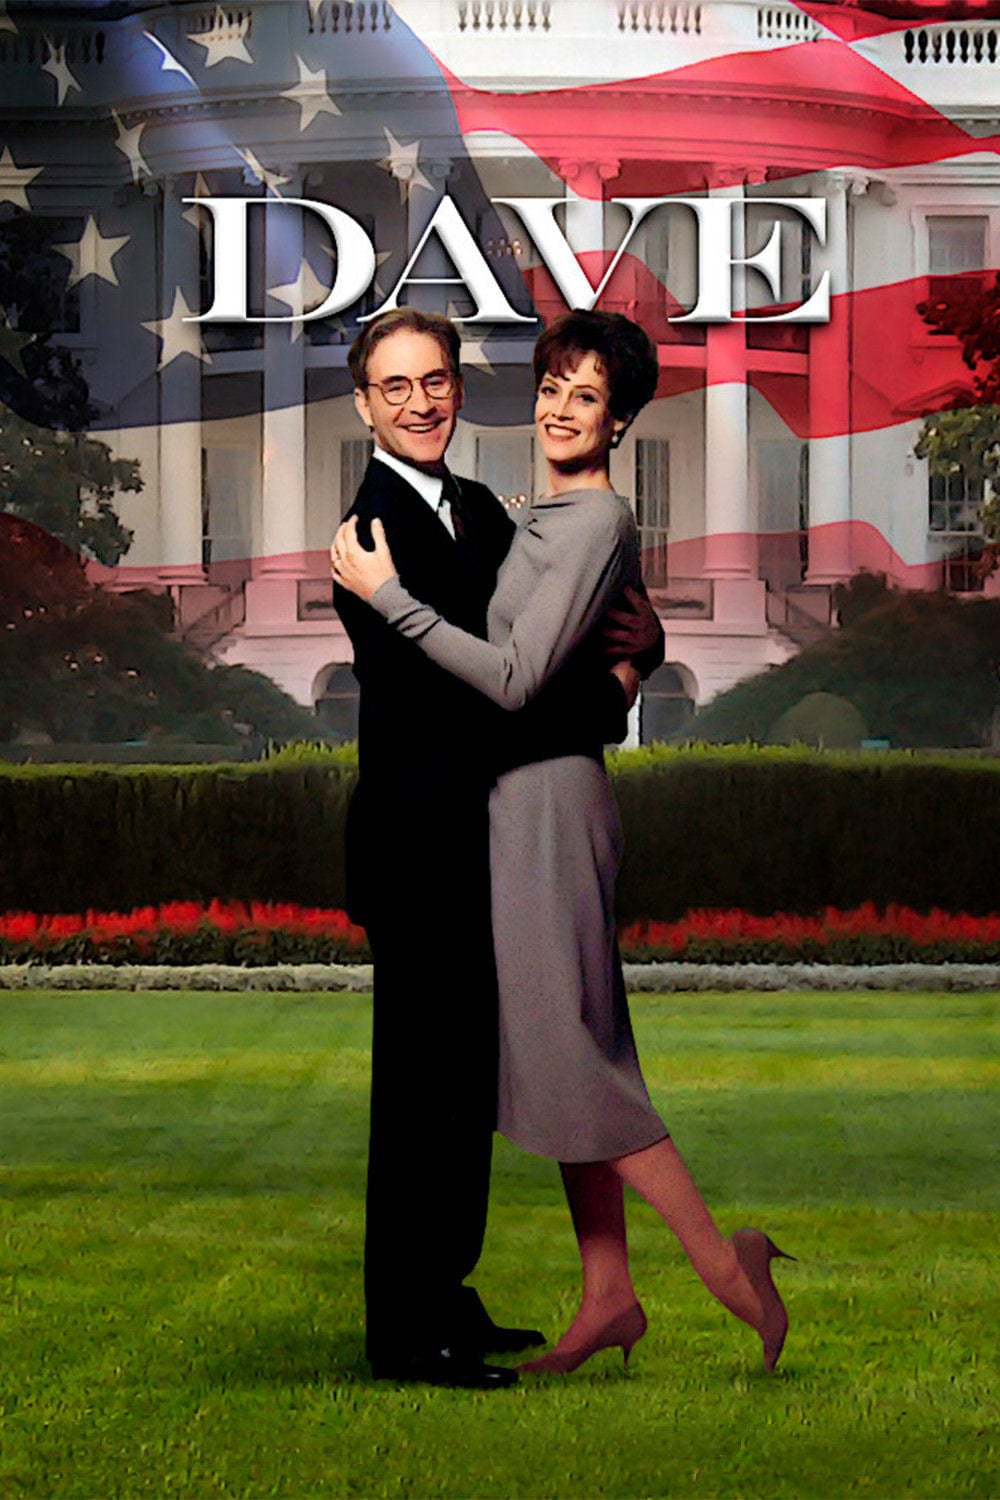 Poster for the movie "Dave"